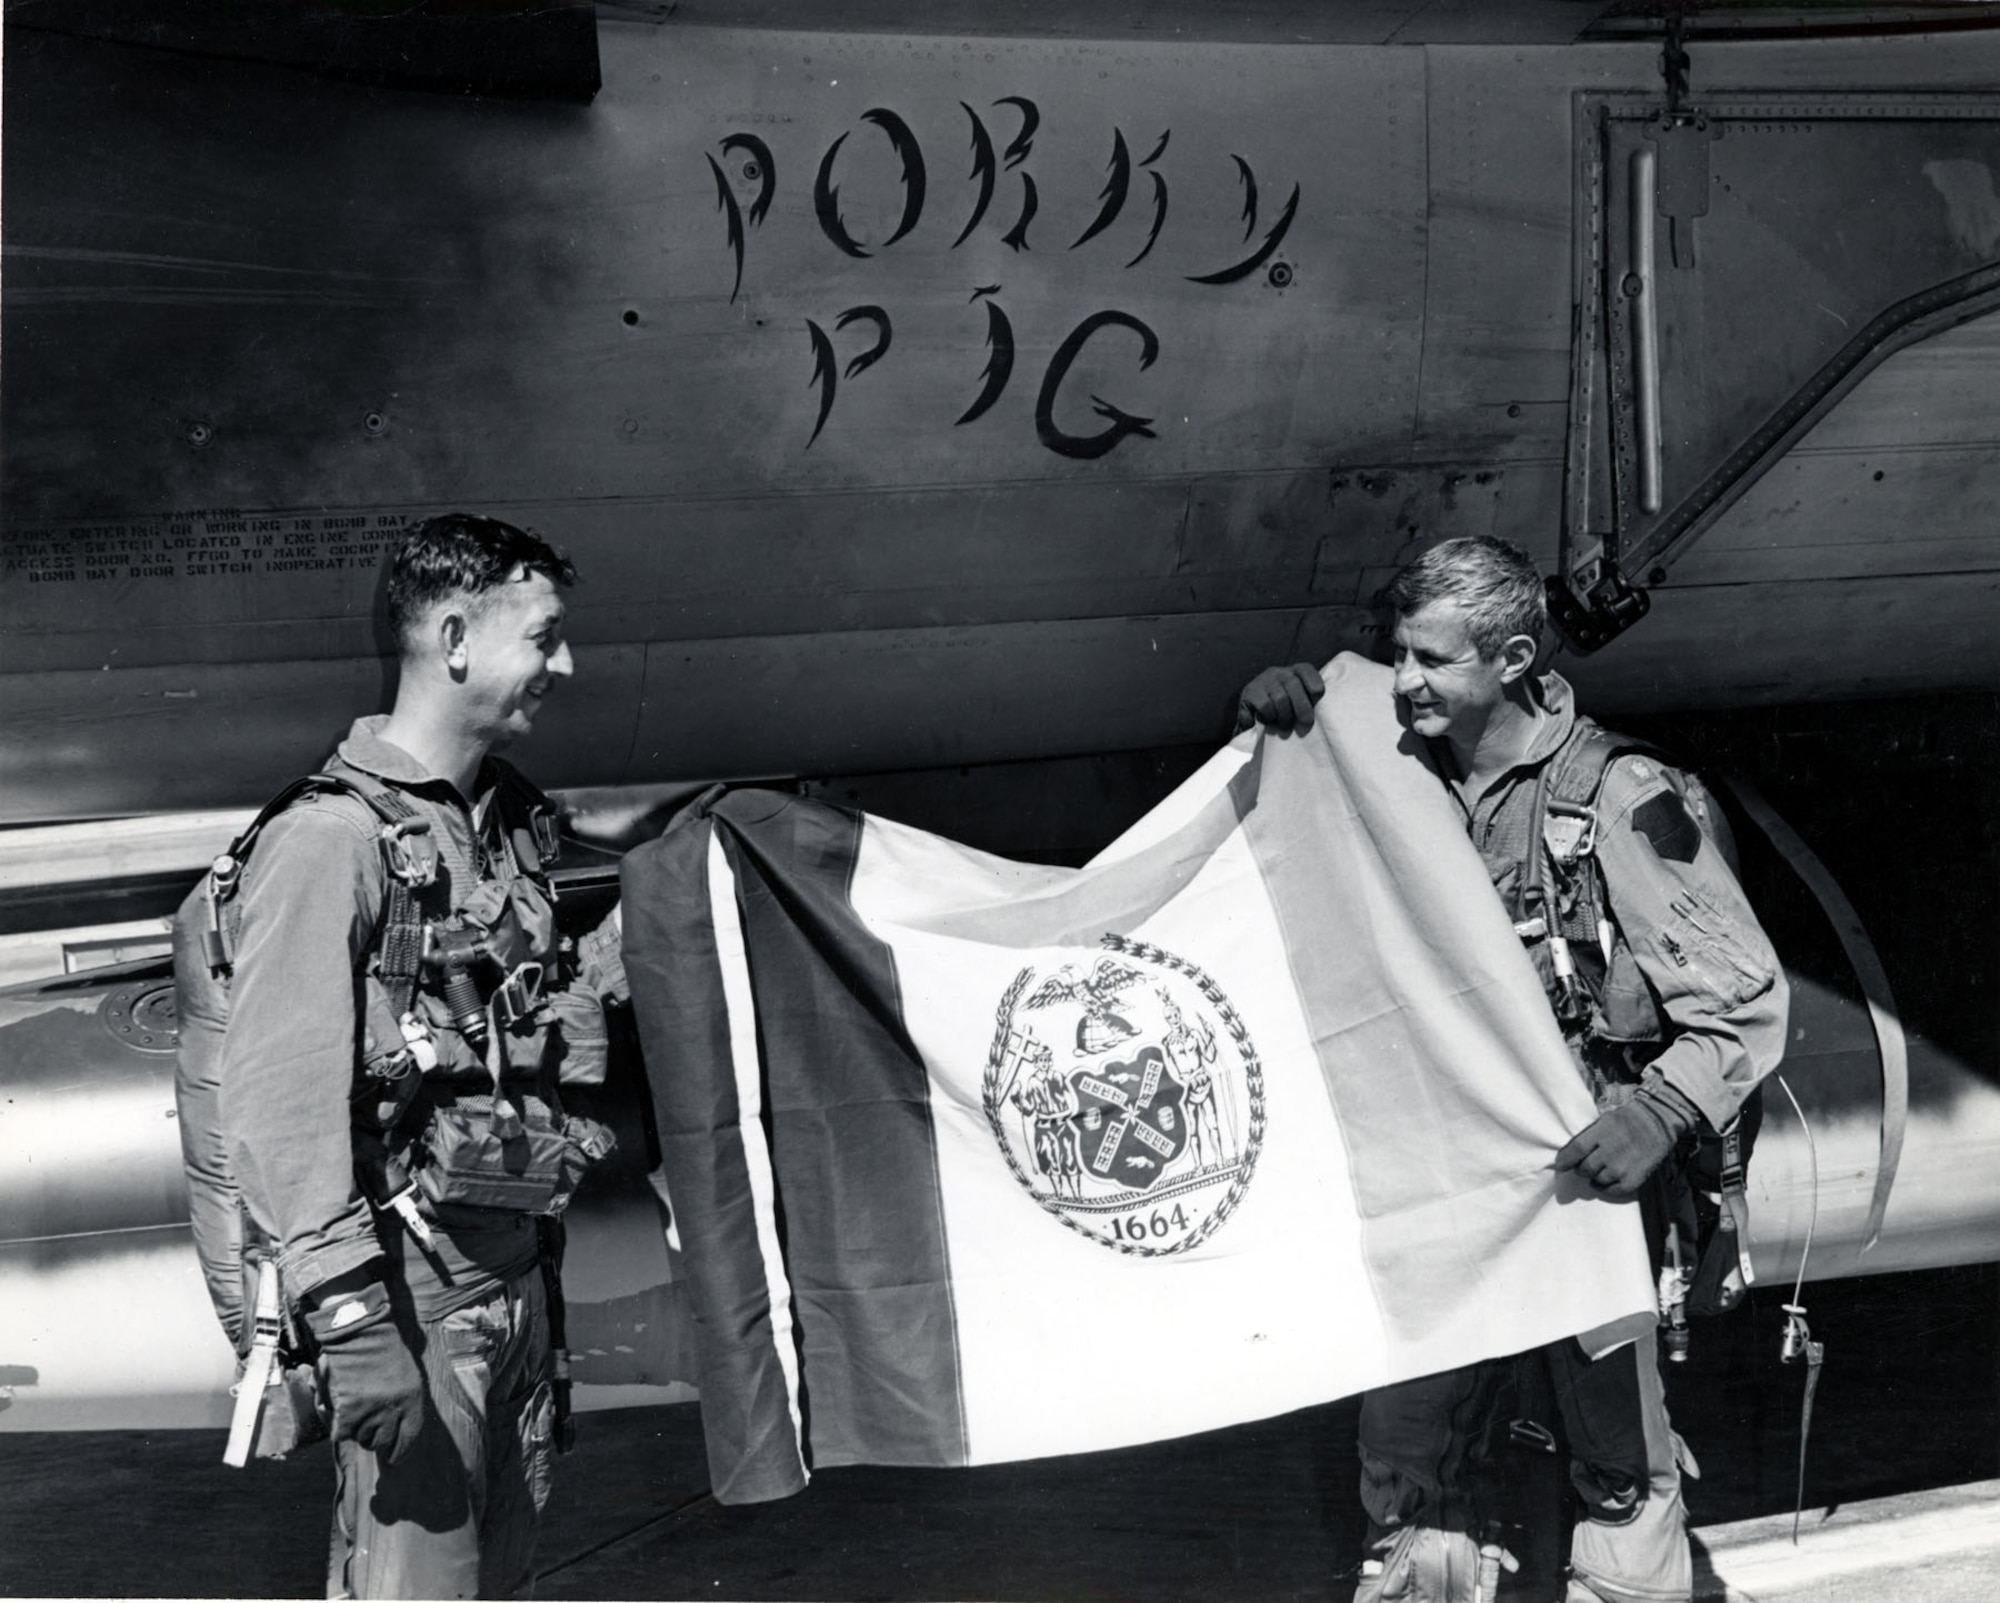 The mayor of New York City sent a city flag after Goldstein requested one to fly over North Vietnam. After doing so, he returned it to the mayor. (U.S. Air Force photo)